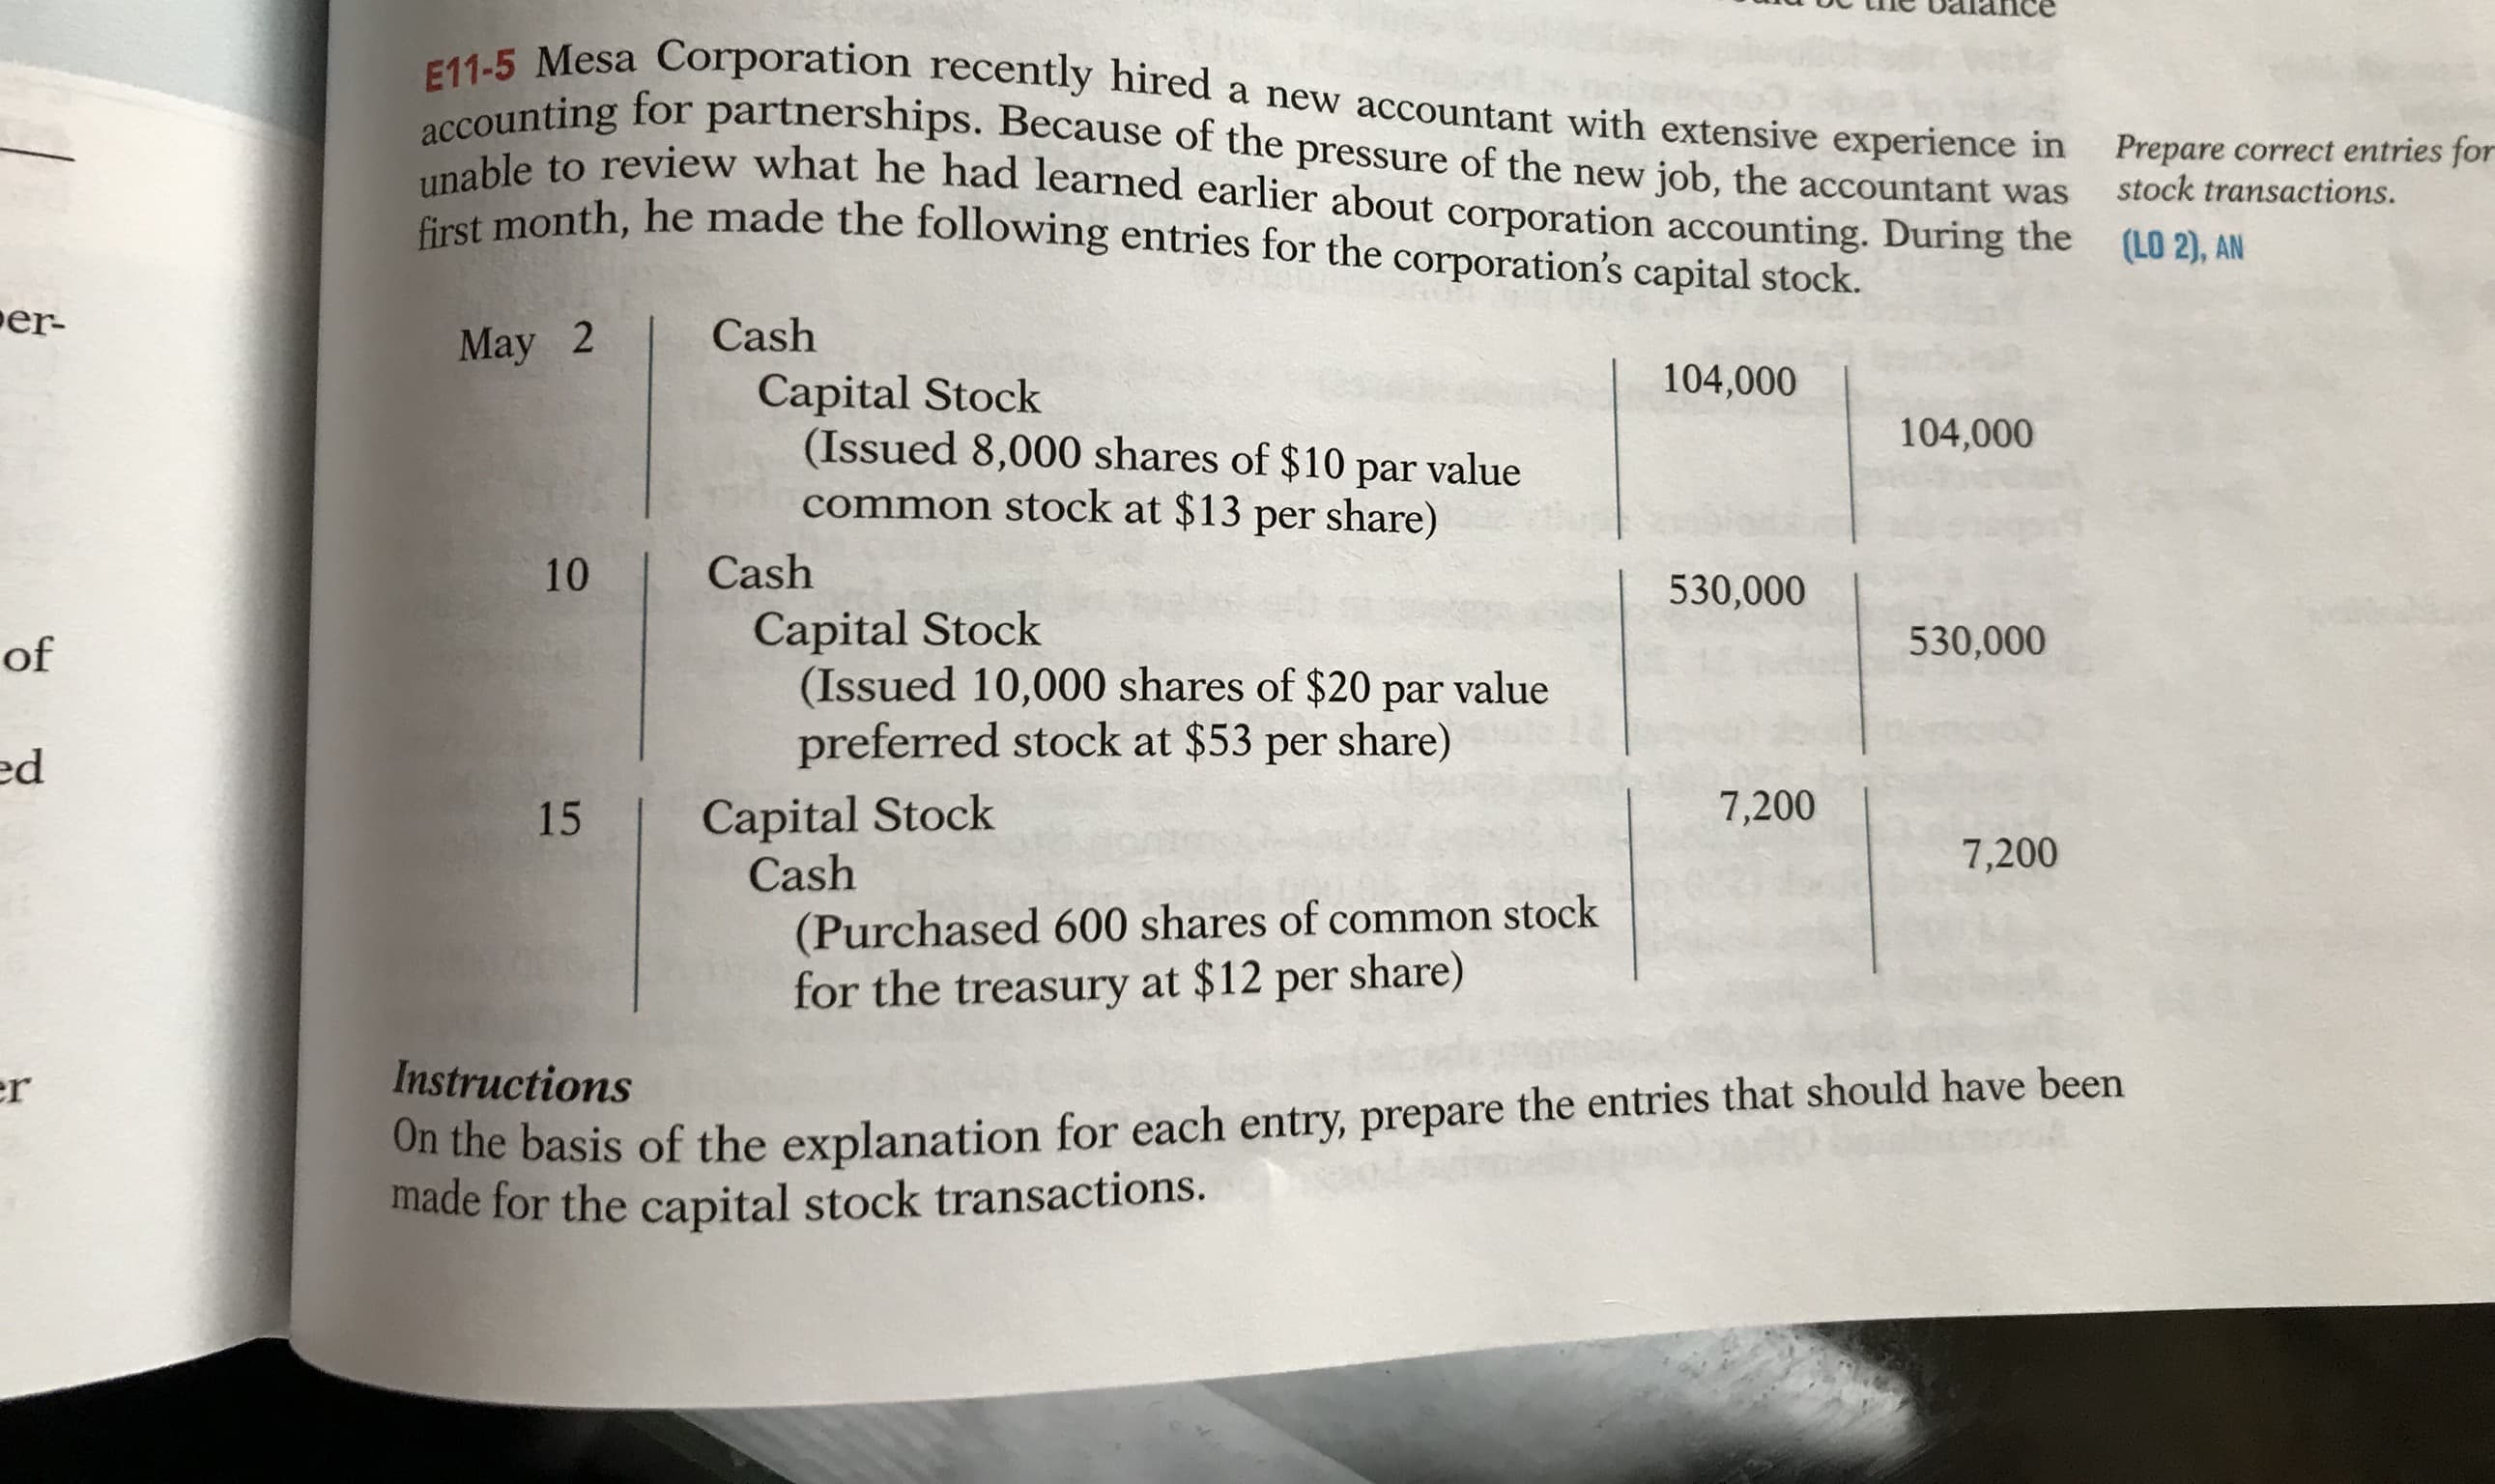 E11-5 Mesa Corporation recently hired a new accountant with extensive experience in
accounting for partnerships. Because of the pressure of the new job, the accountant was
unable to review what he had learned earlier about corporation accounting. During the (LO 2), AN
first month, he made the following entries for the corporation's capital stock.
Prepare correct entries for
stock transactions.
er-
May 2
Cash
104,000
Capital Stock
(Issued 8,000 shares of $10 par value
common stock at $13 per share)
104,000
10
Cash
530,000
Capital Stock
(Issued 10,000 shares of $20 par value
preferred stock at $53 per share)
of
530,000
ed
Capital Stock
Cash
15
7,200
7,200
(Purchased 600 shares of common stock
for the treasury at $12 per share)
On the basis of the explanation for each entry, prepare the entries that should have been
made for the capital stock transactions.
er
Instructions
